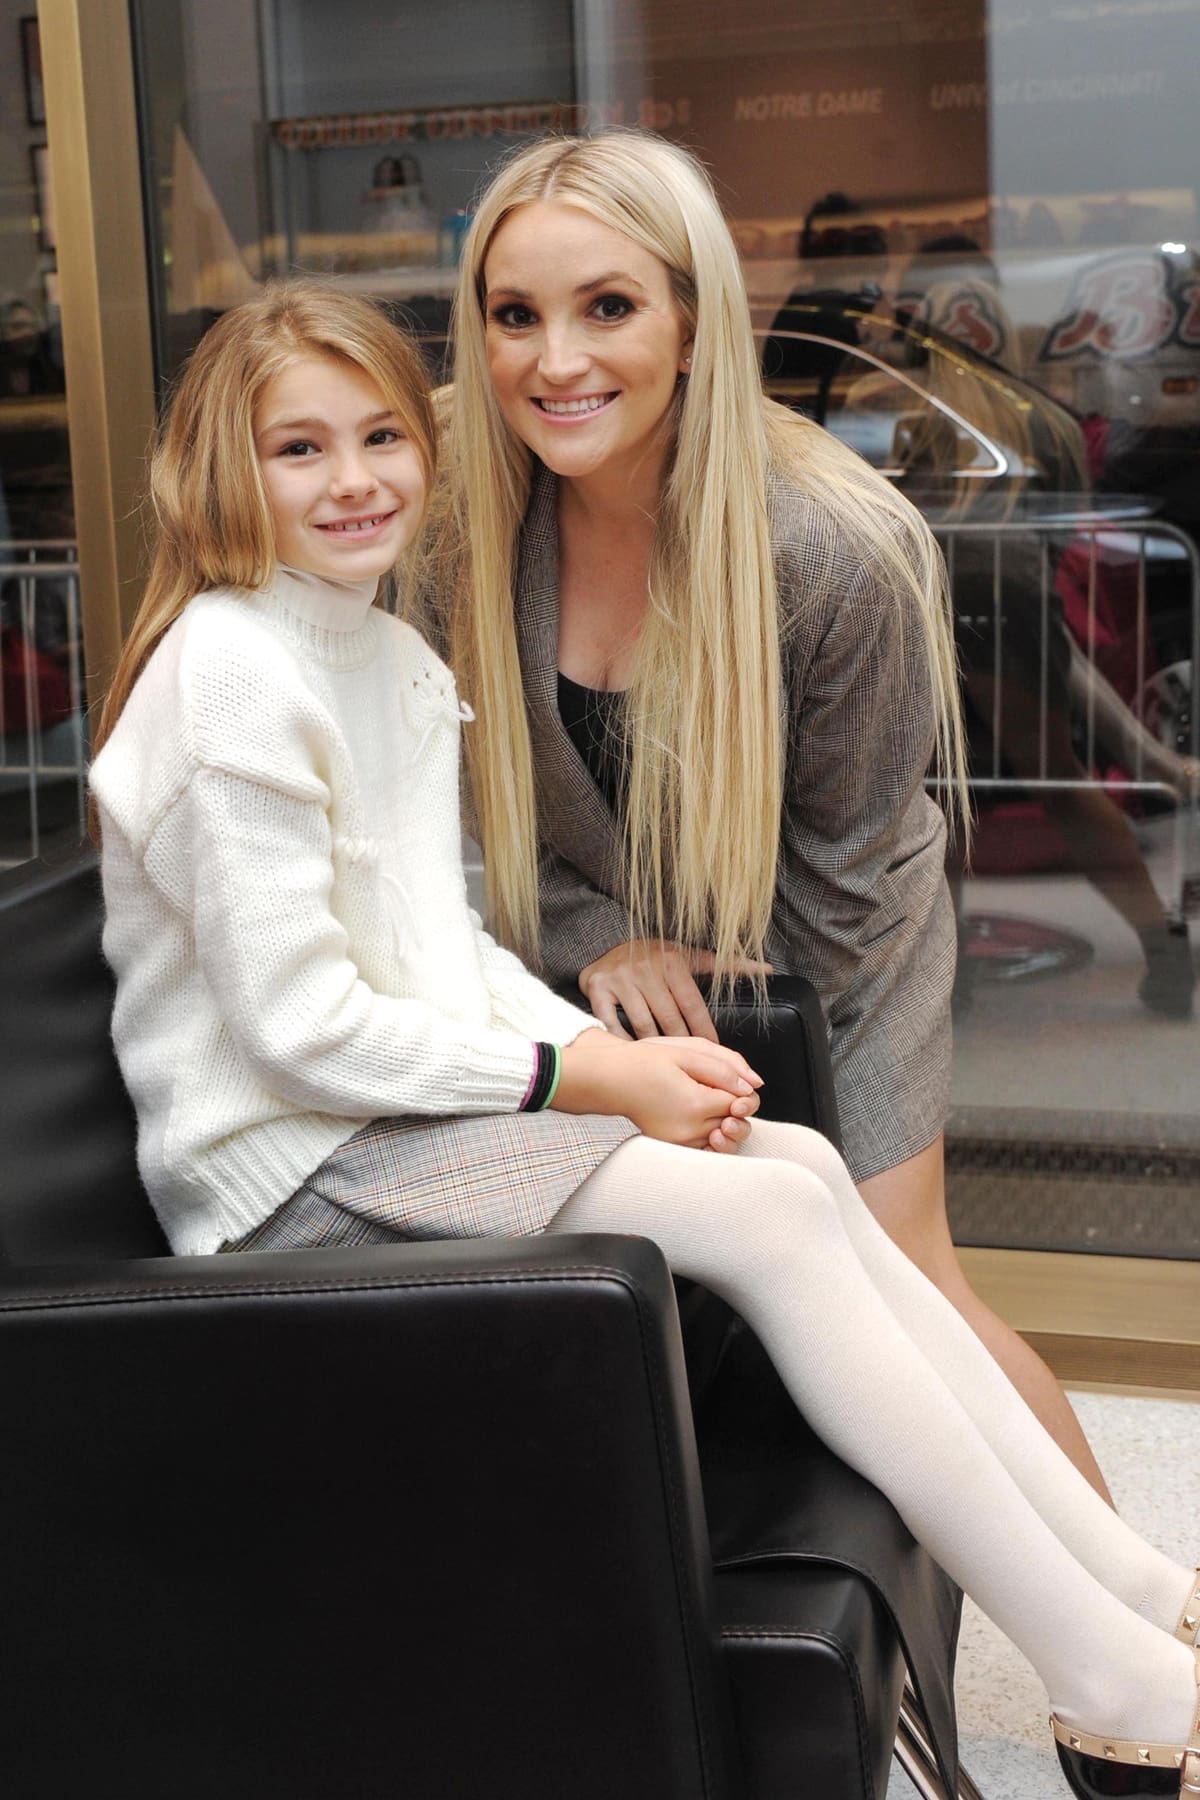 Jamie Lynn Spears with her daughter Maddie Briann Aldridge attend an exclusive American Girl Place event in NYC